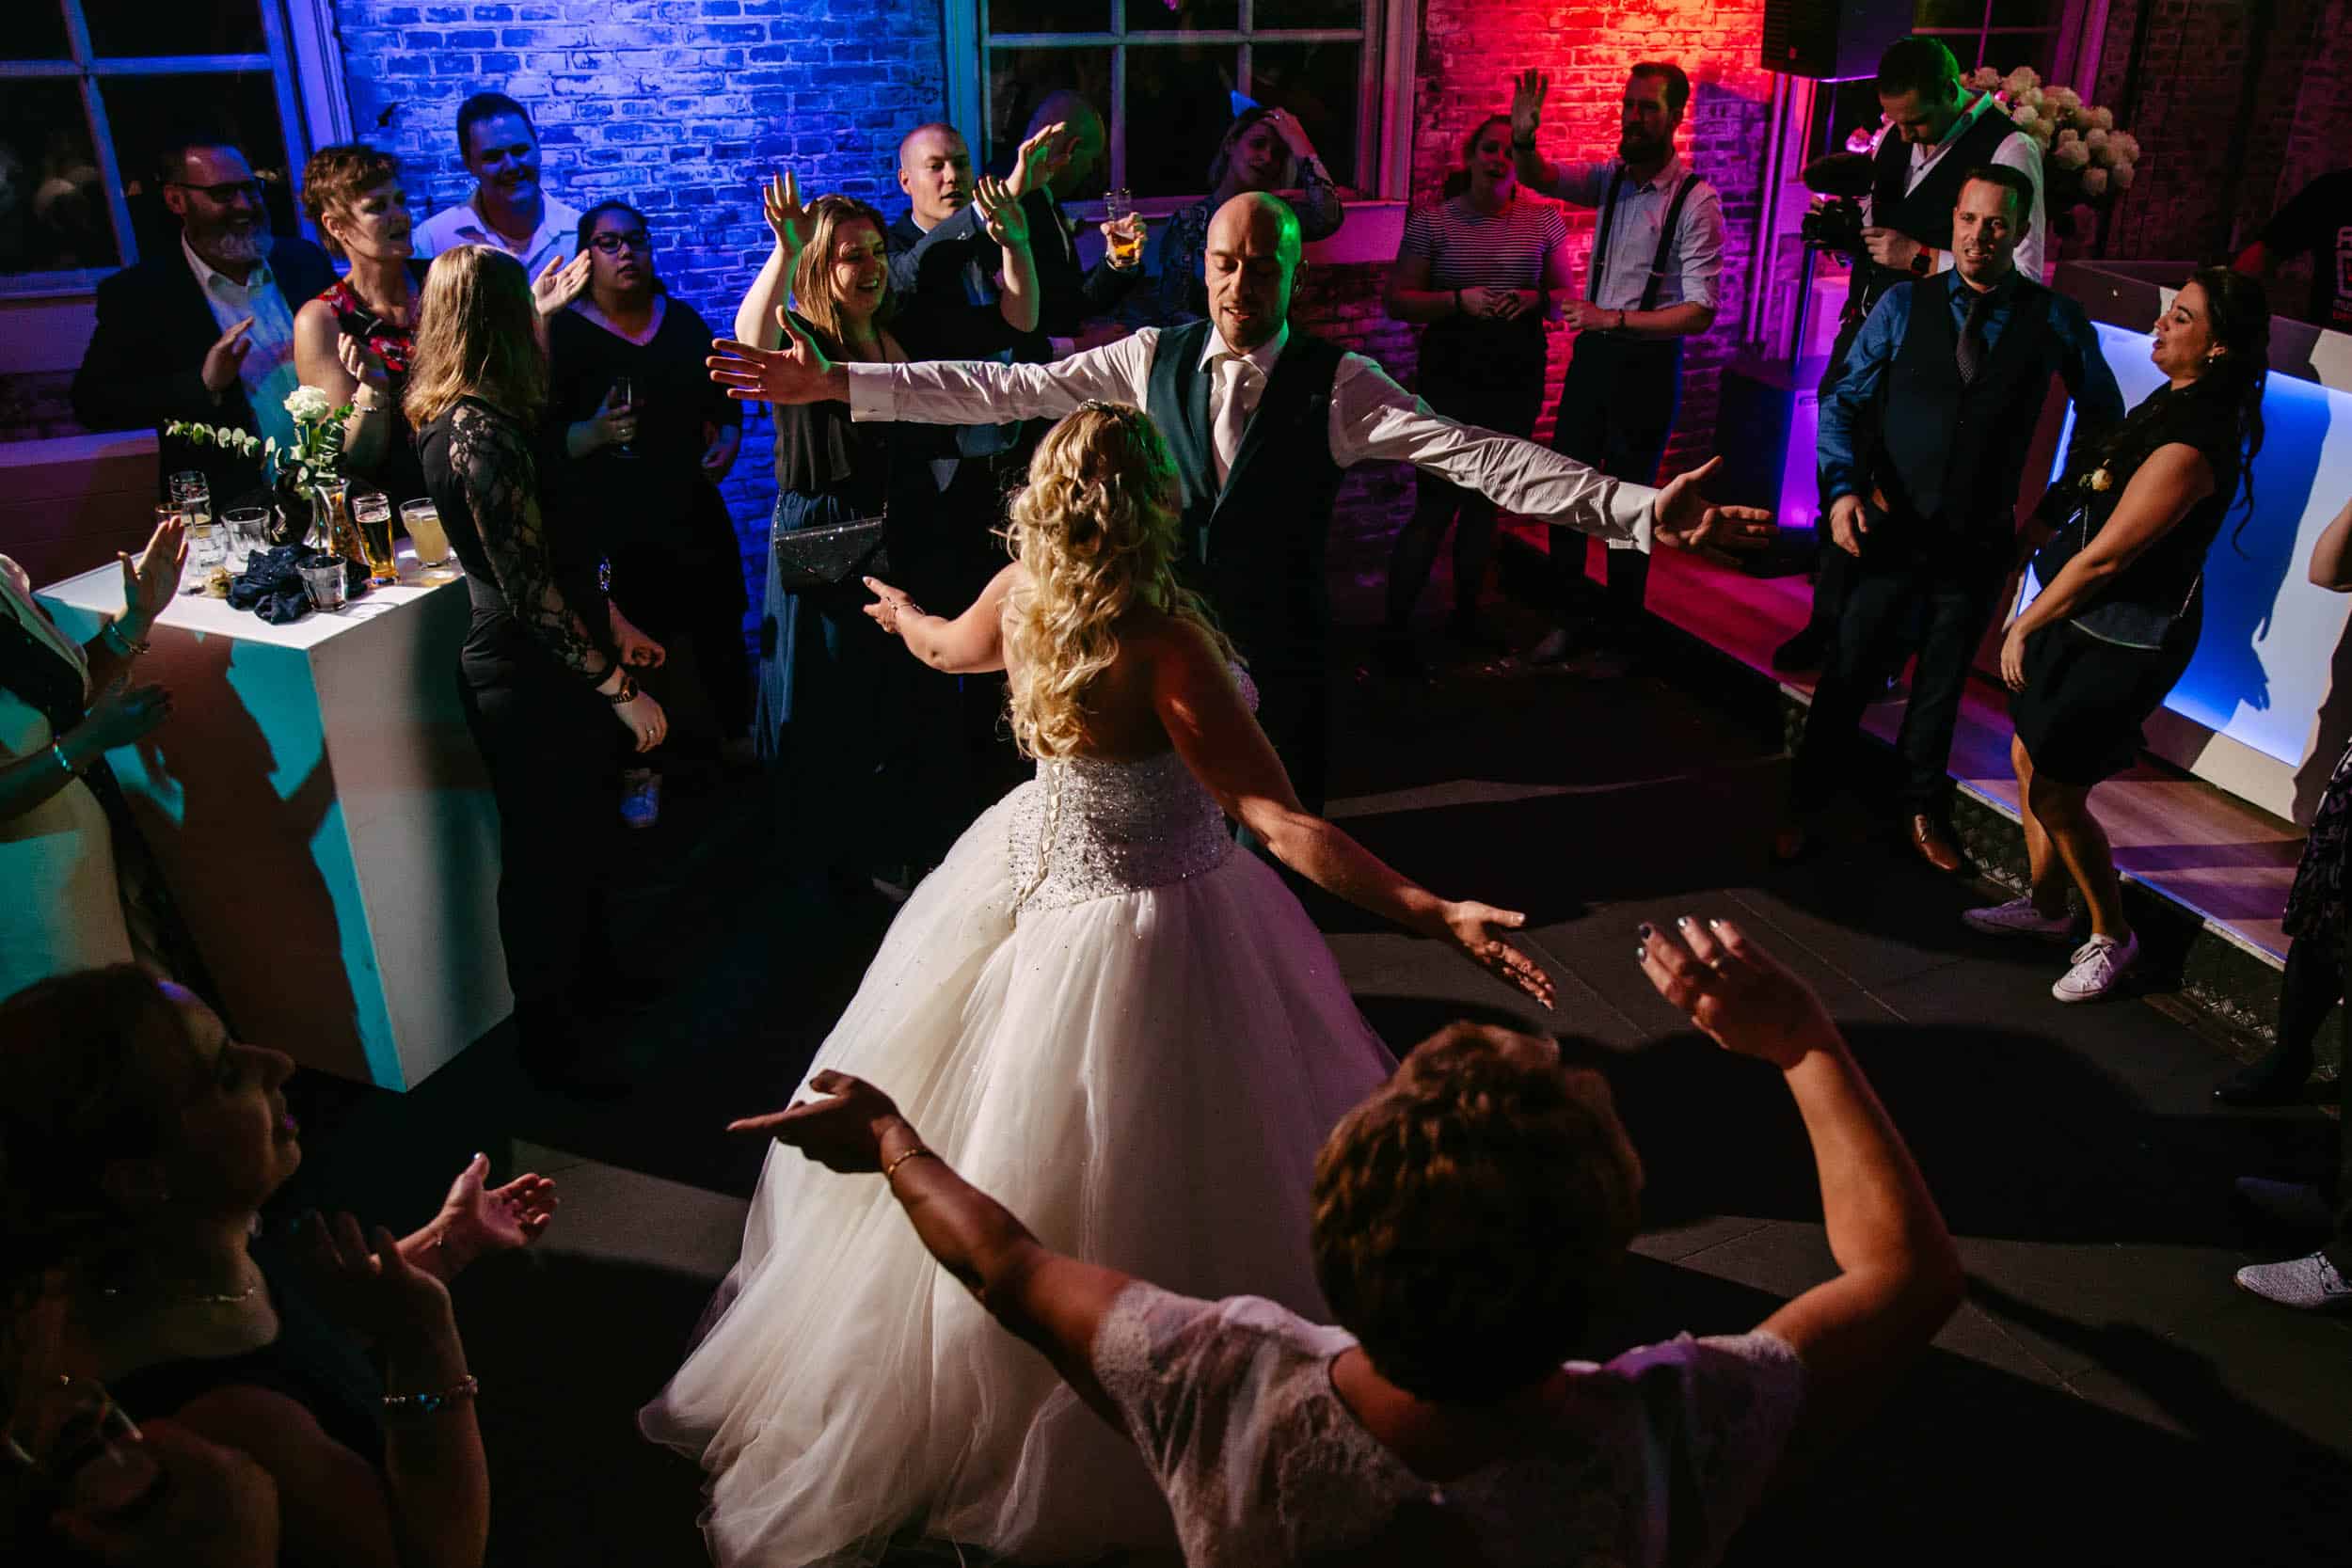 A bride and groom dance at a wedding party.